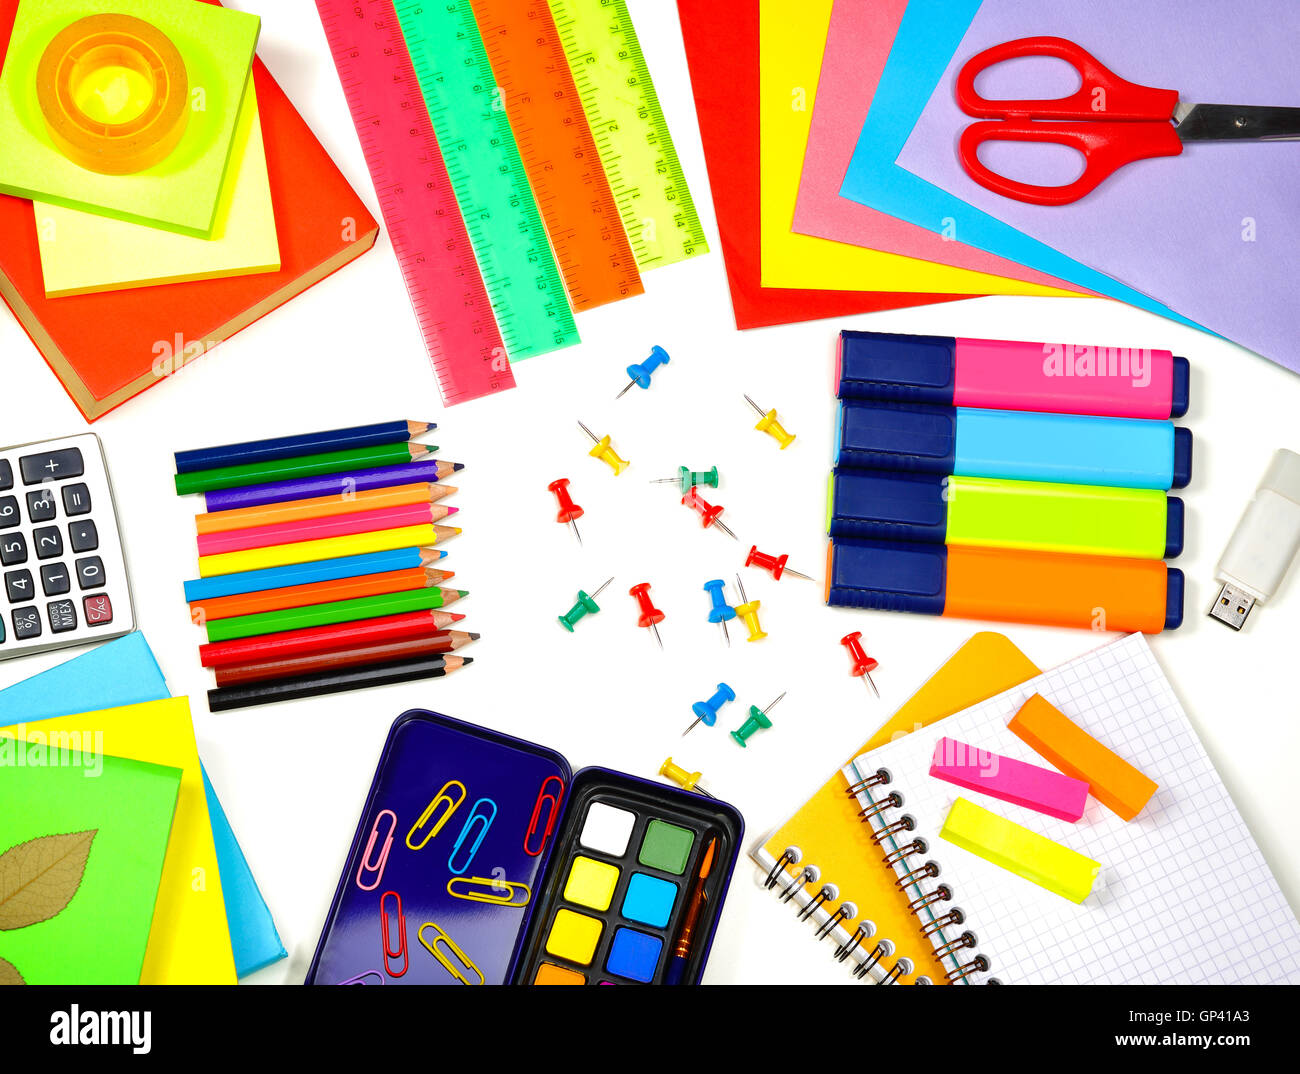 Different school supplies, colorful background, necessary accessories for study, back to school concept Stock Photo